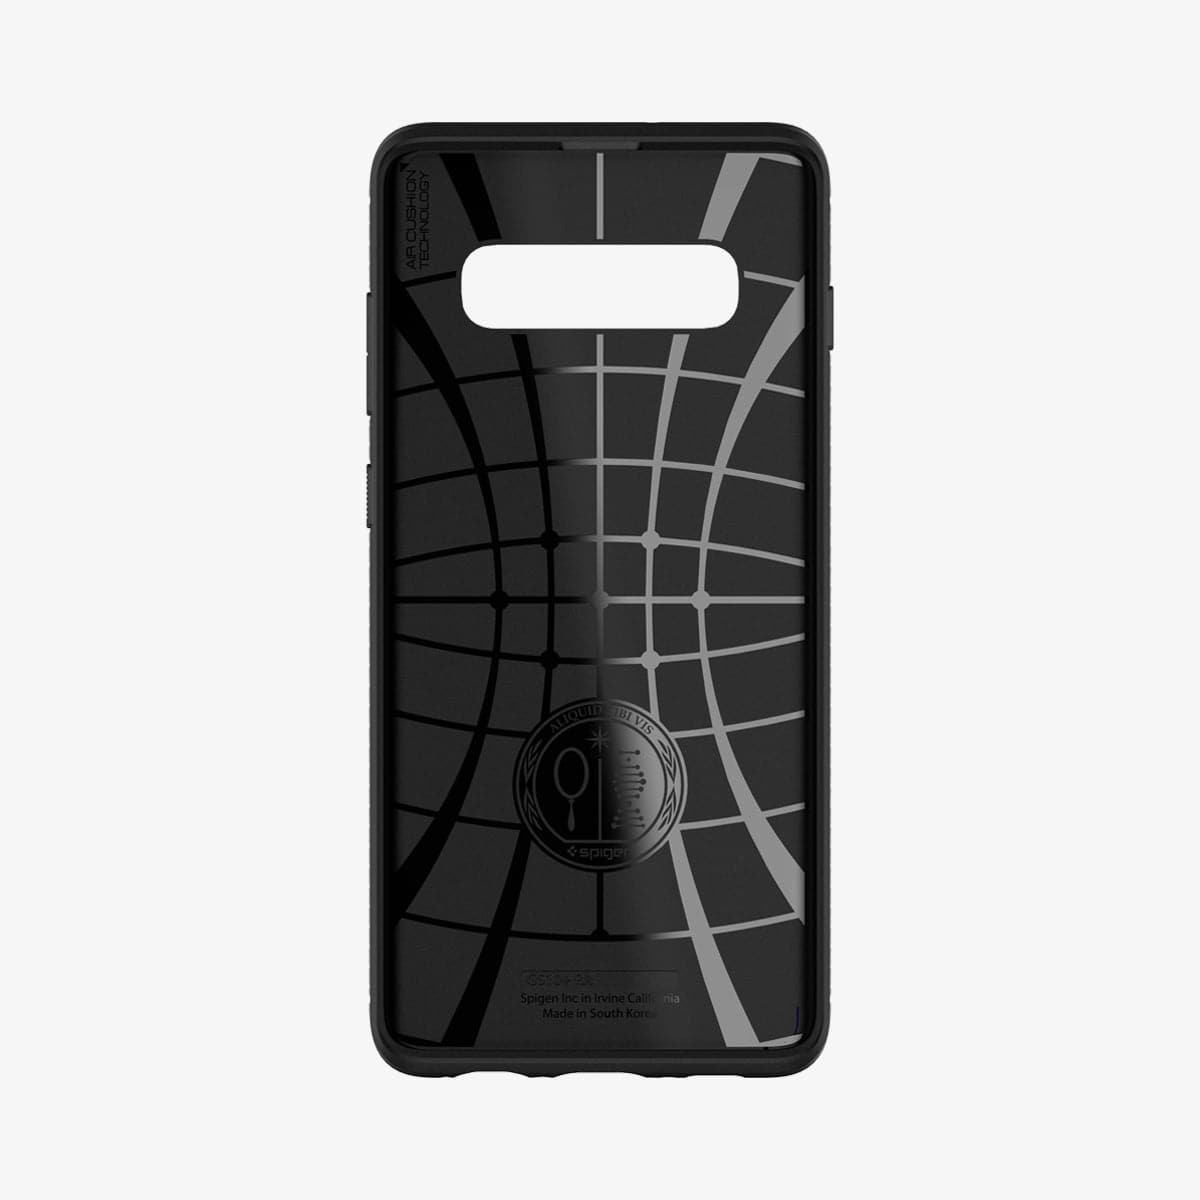 605CS25800 - Galaxy S10 Rugged Armor Case in black showing the inside of case